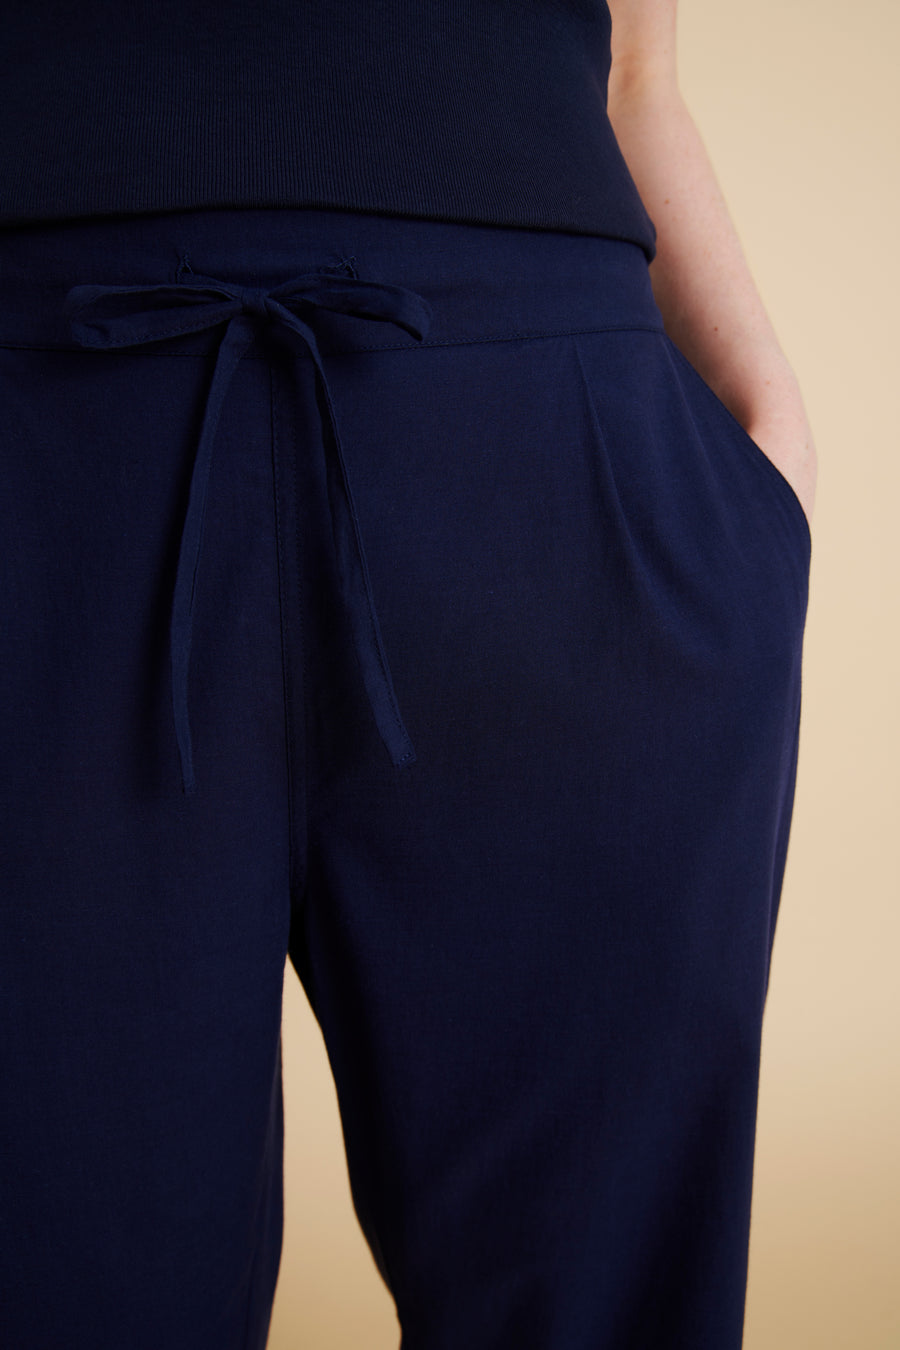 Roll With It Pants - Navy